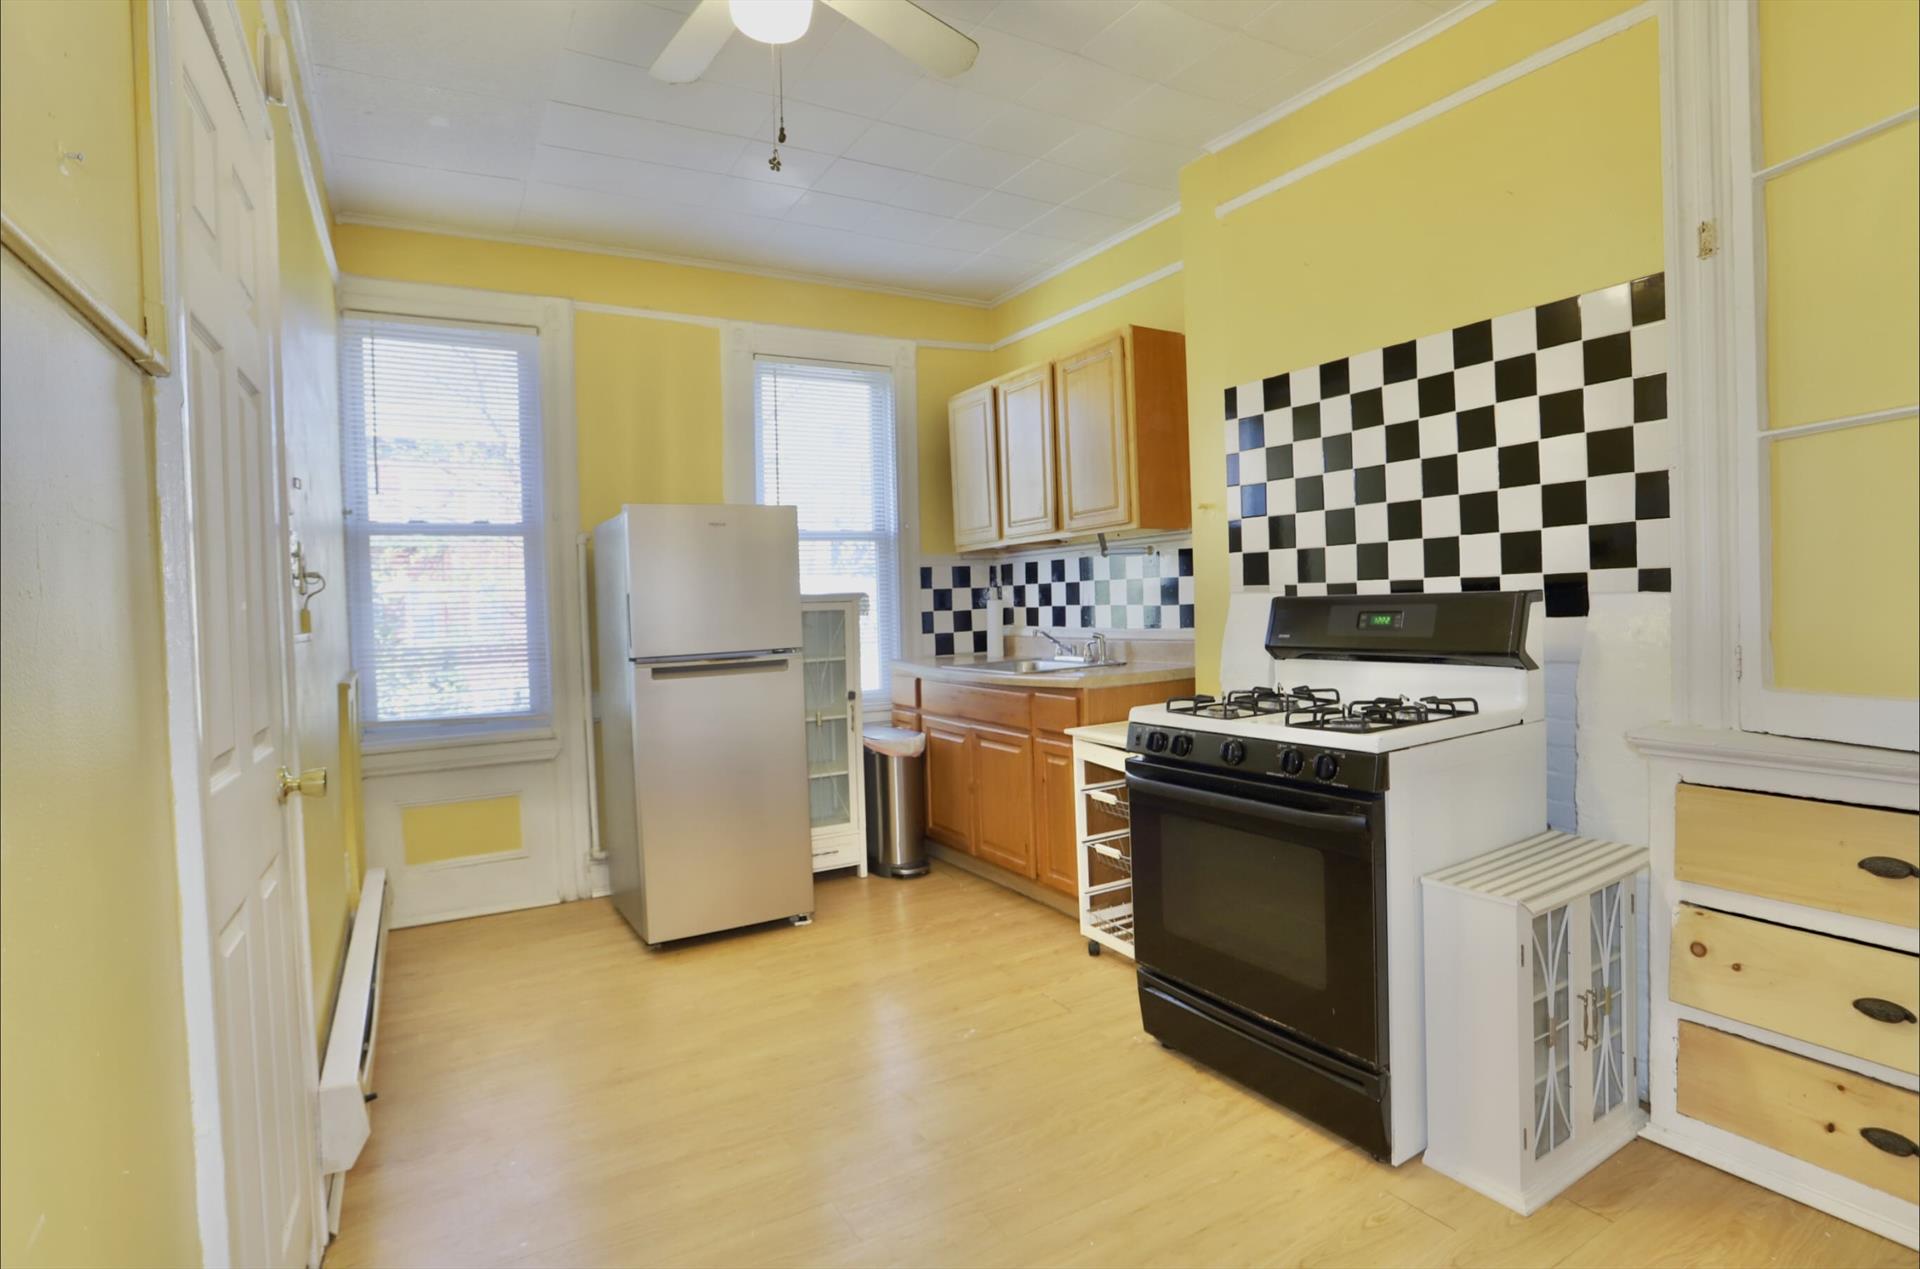 AVAIL ASAP - PRIME location in desirable Hamilton Park area. Sunny 1 bed 1 bath + den in brick building. Very large railroad apartment with great light. Close to mass transit, parks, shopping, restaurants, and more. Schedule a viewing today! Won't last! 